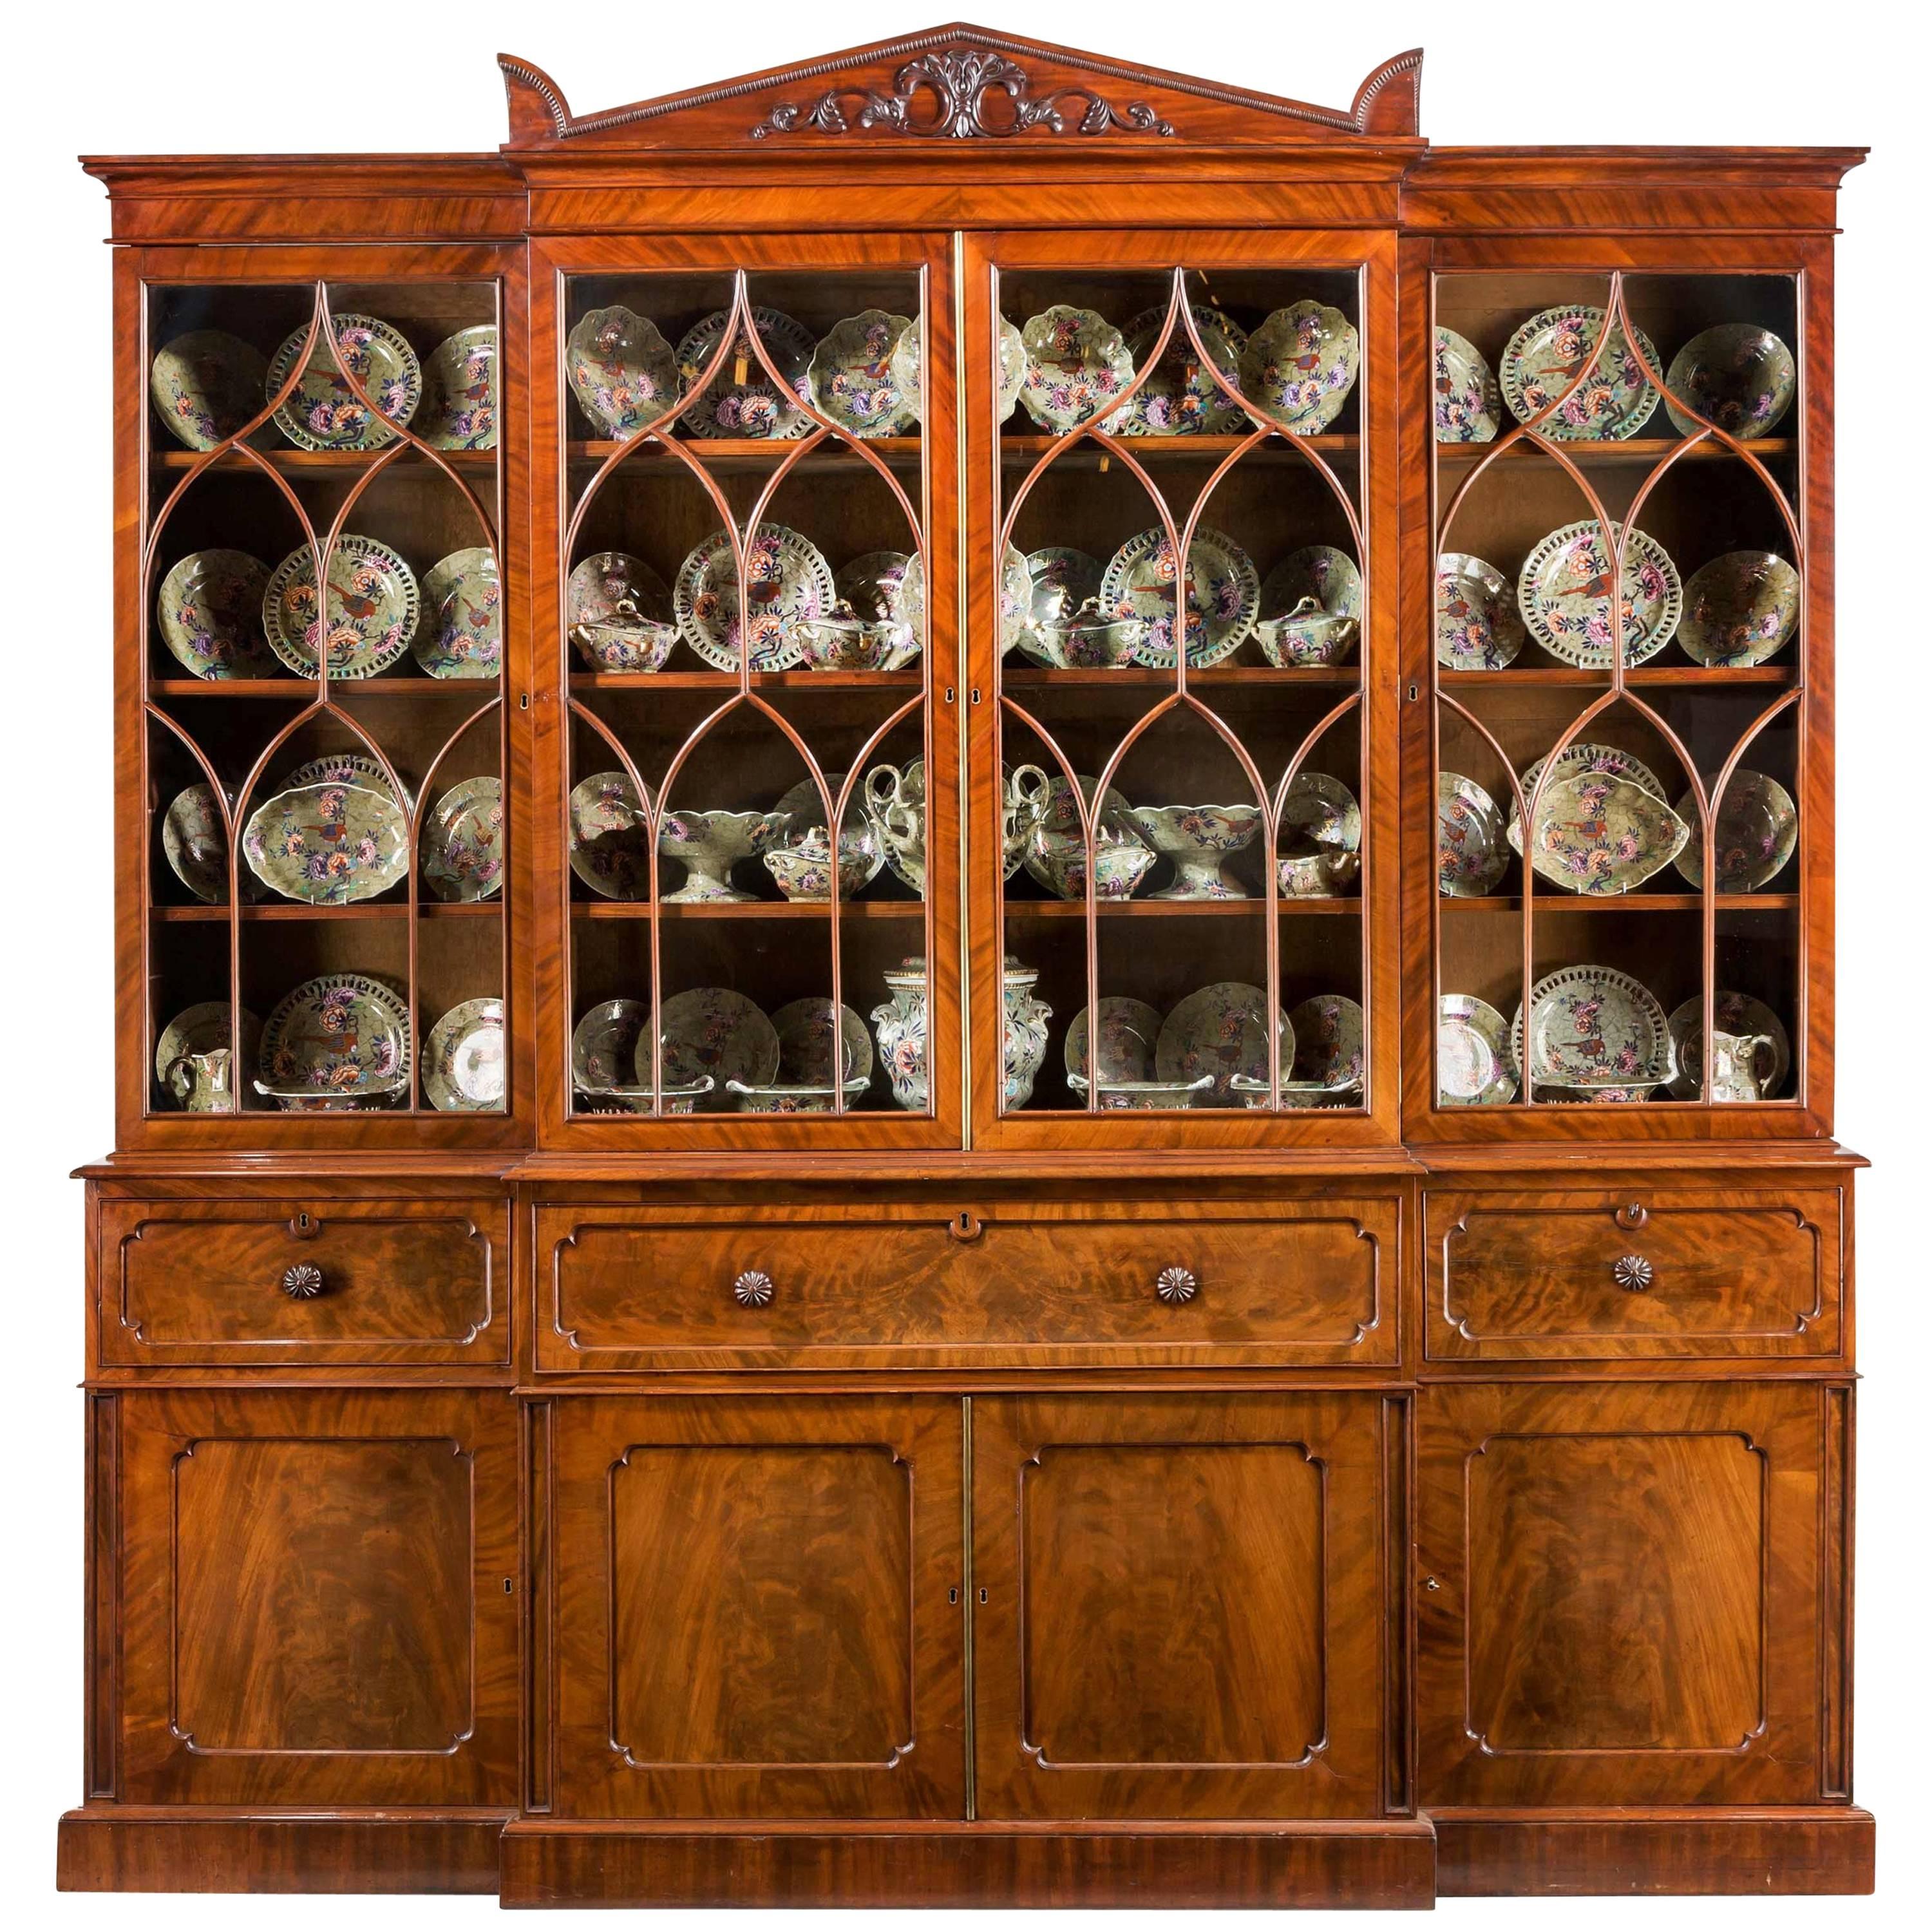 Regency Mahogany Library Breakfront Secretaire Bookcase attributed to Gillows